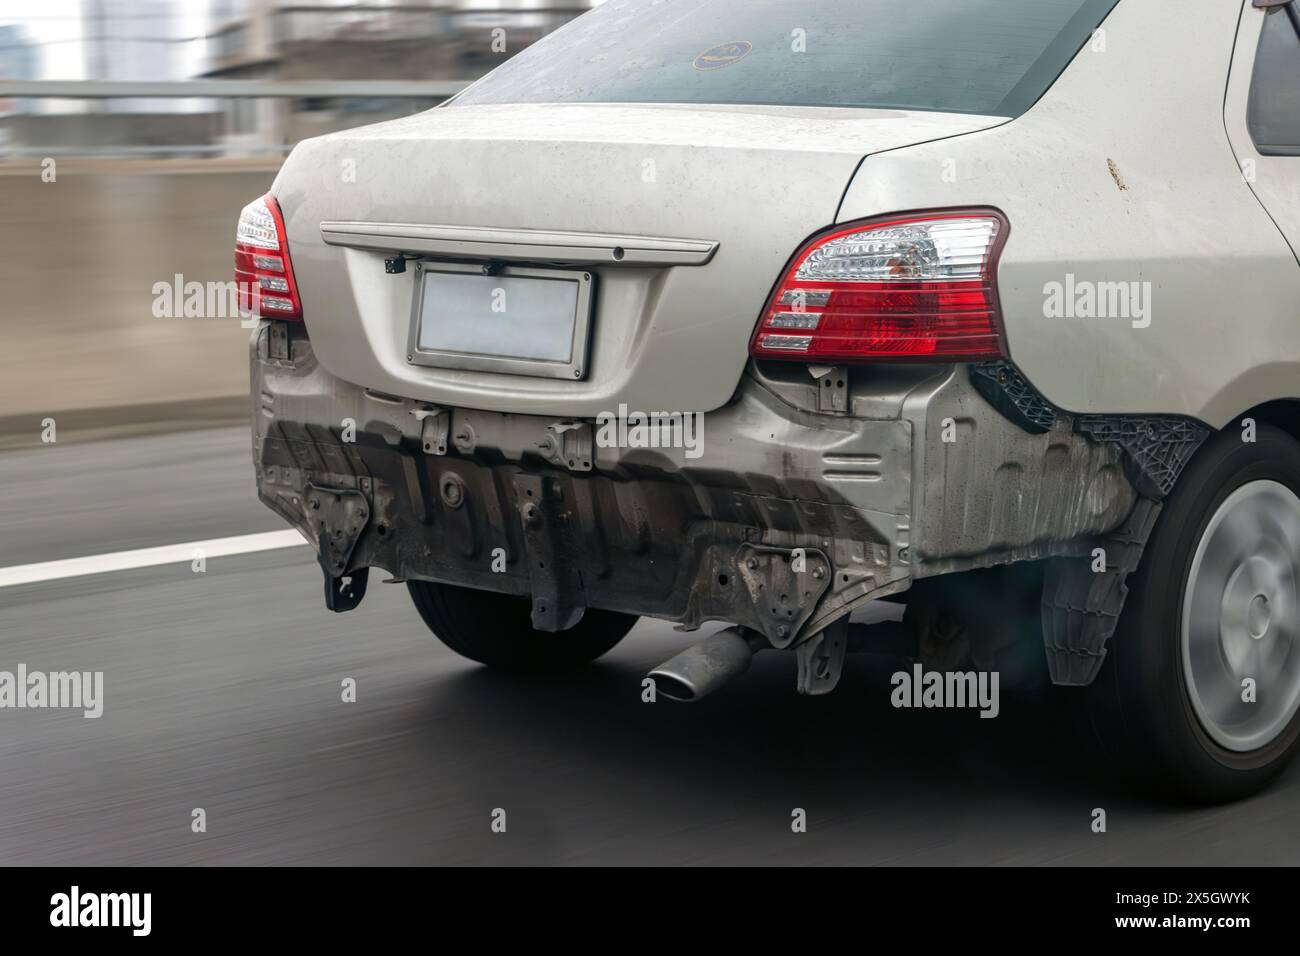 A car is driving on the road without a rear bumper Stock Photo